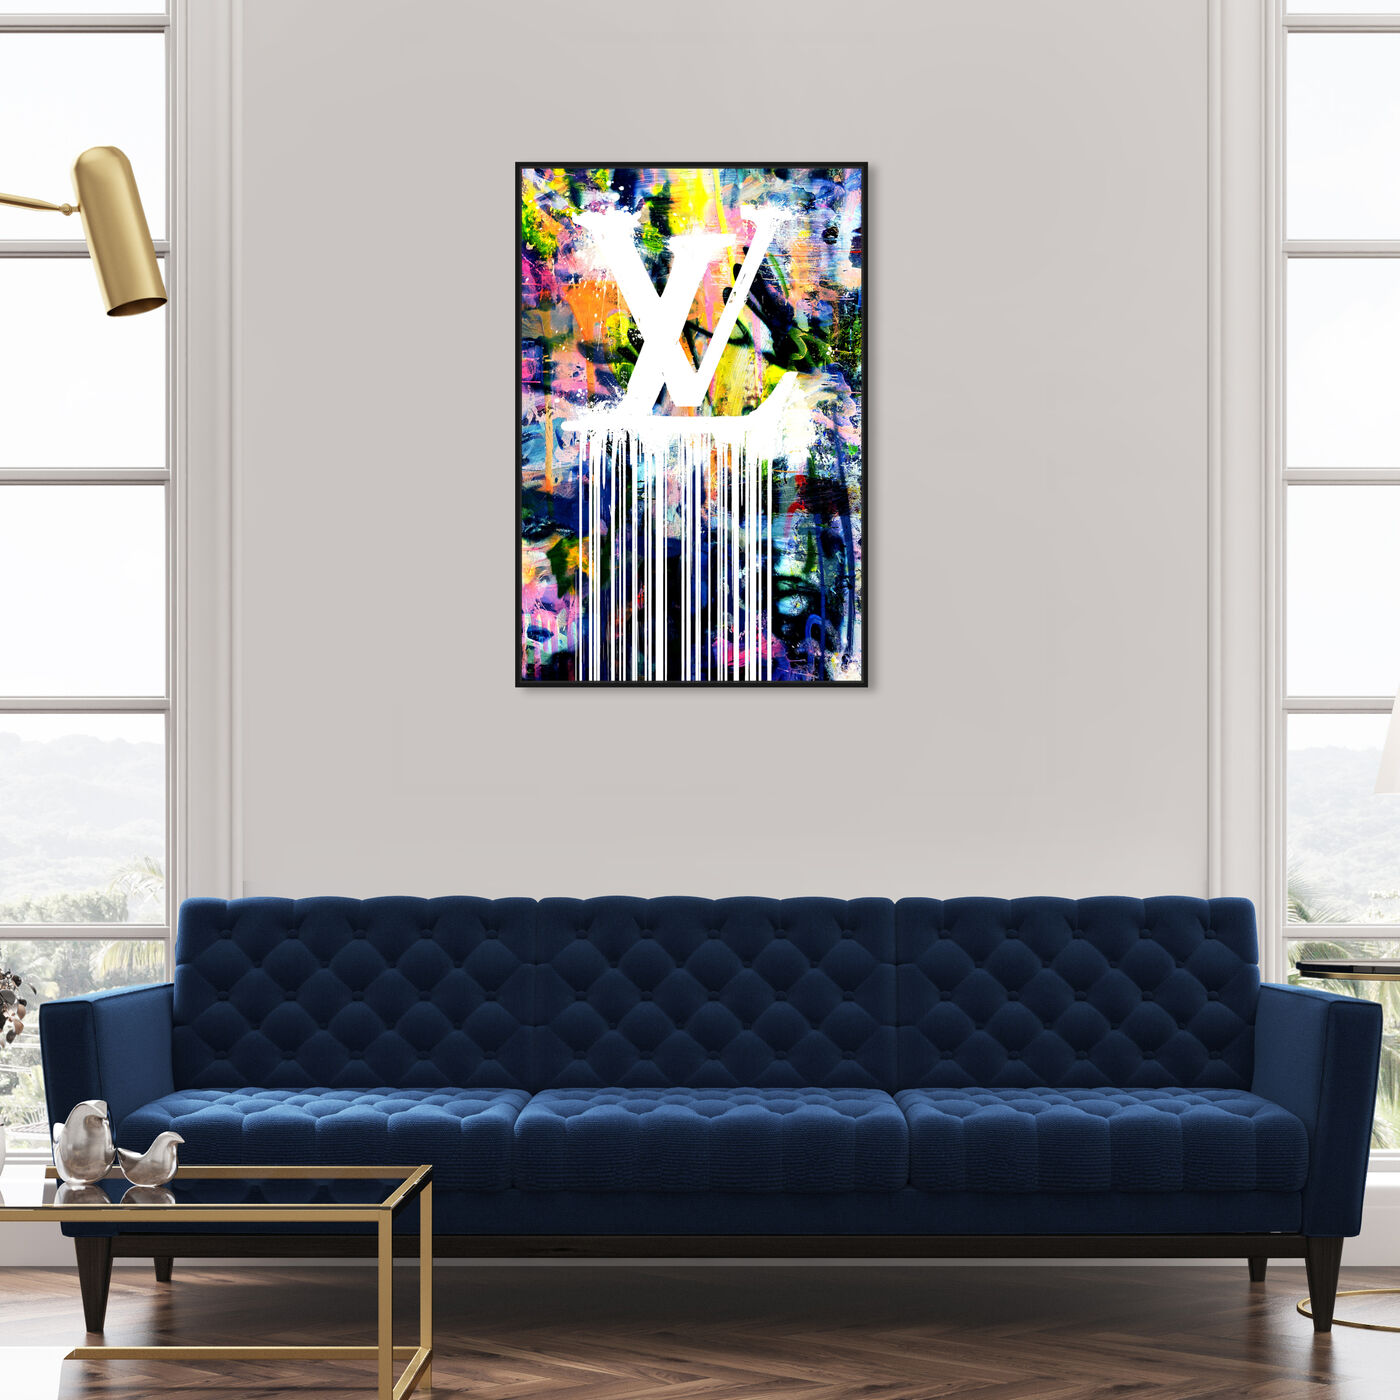 Dripping Stencil Holo SET  Wall Art by The Oliver Gal